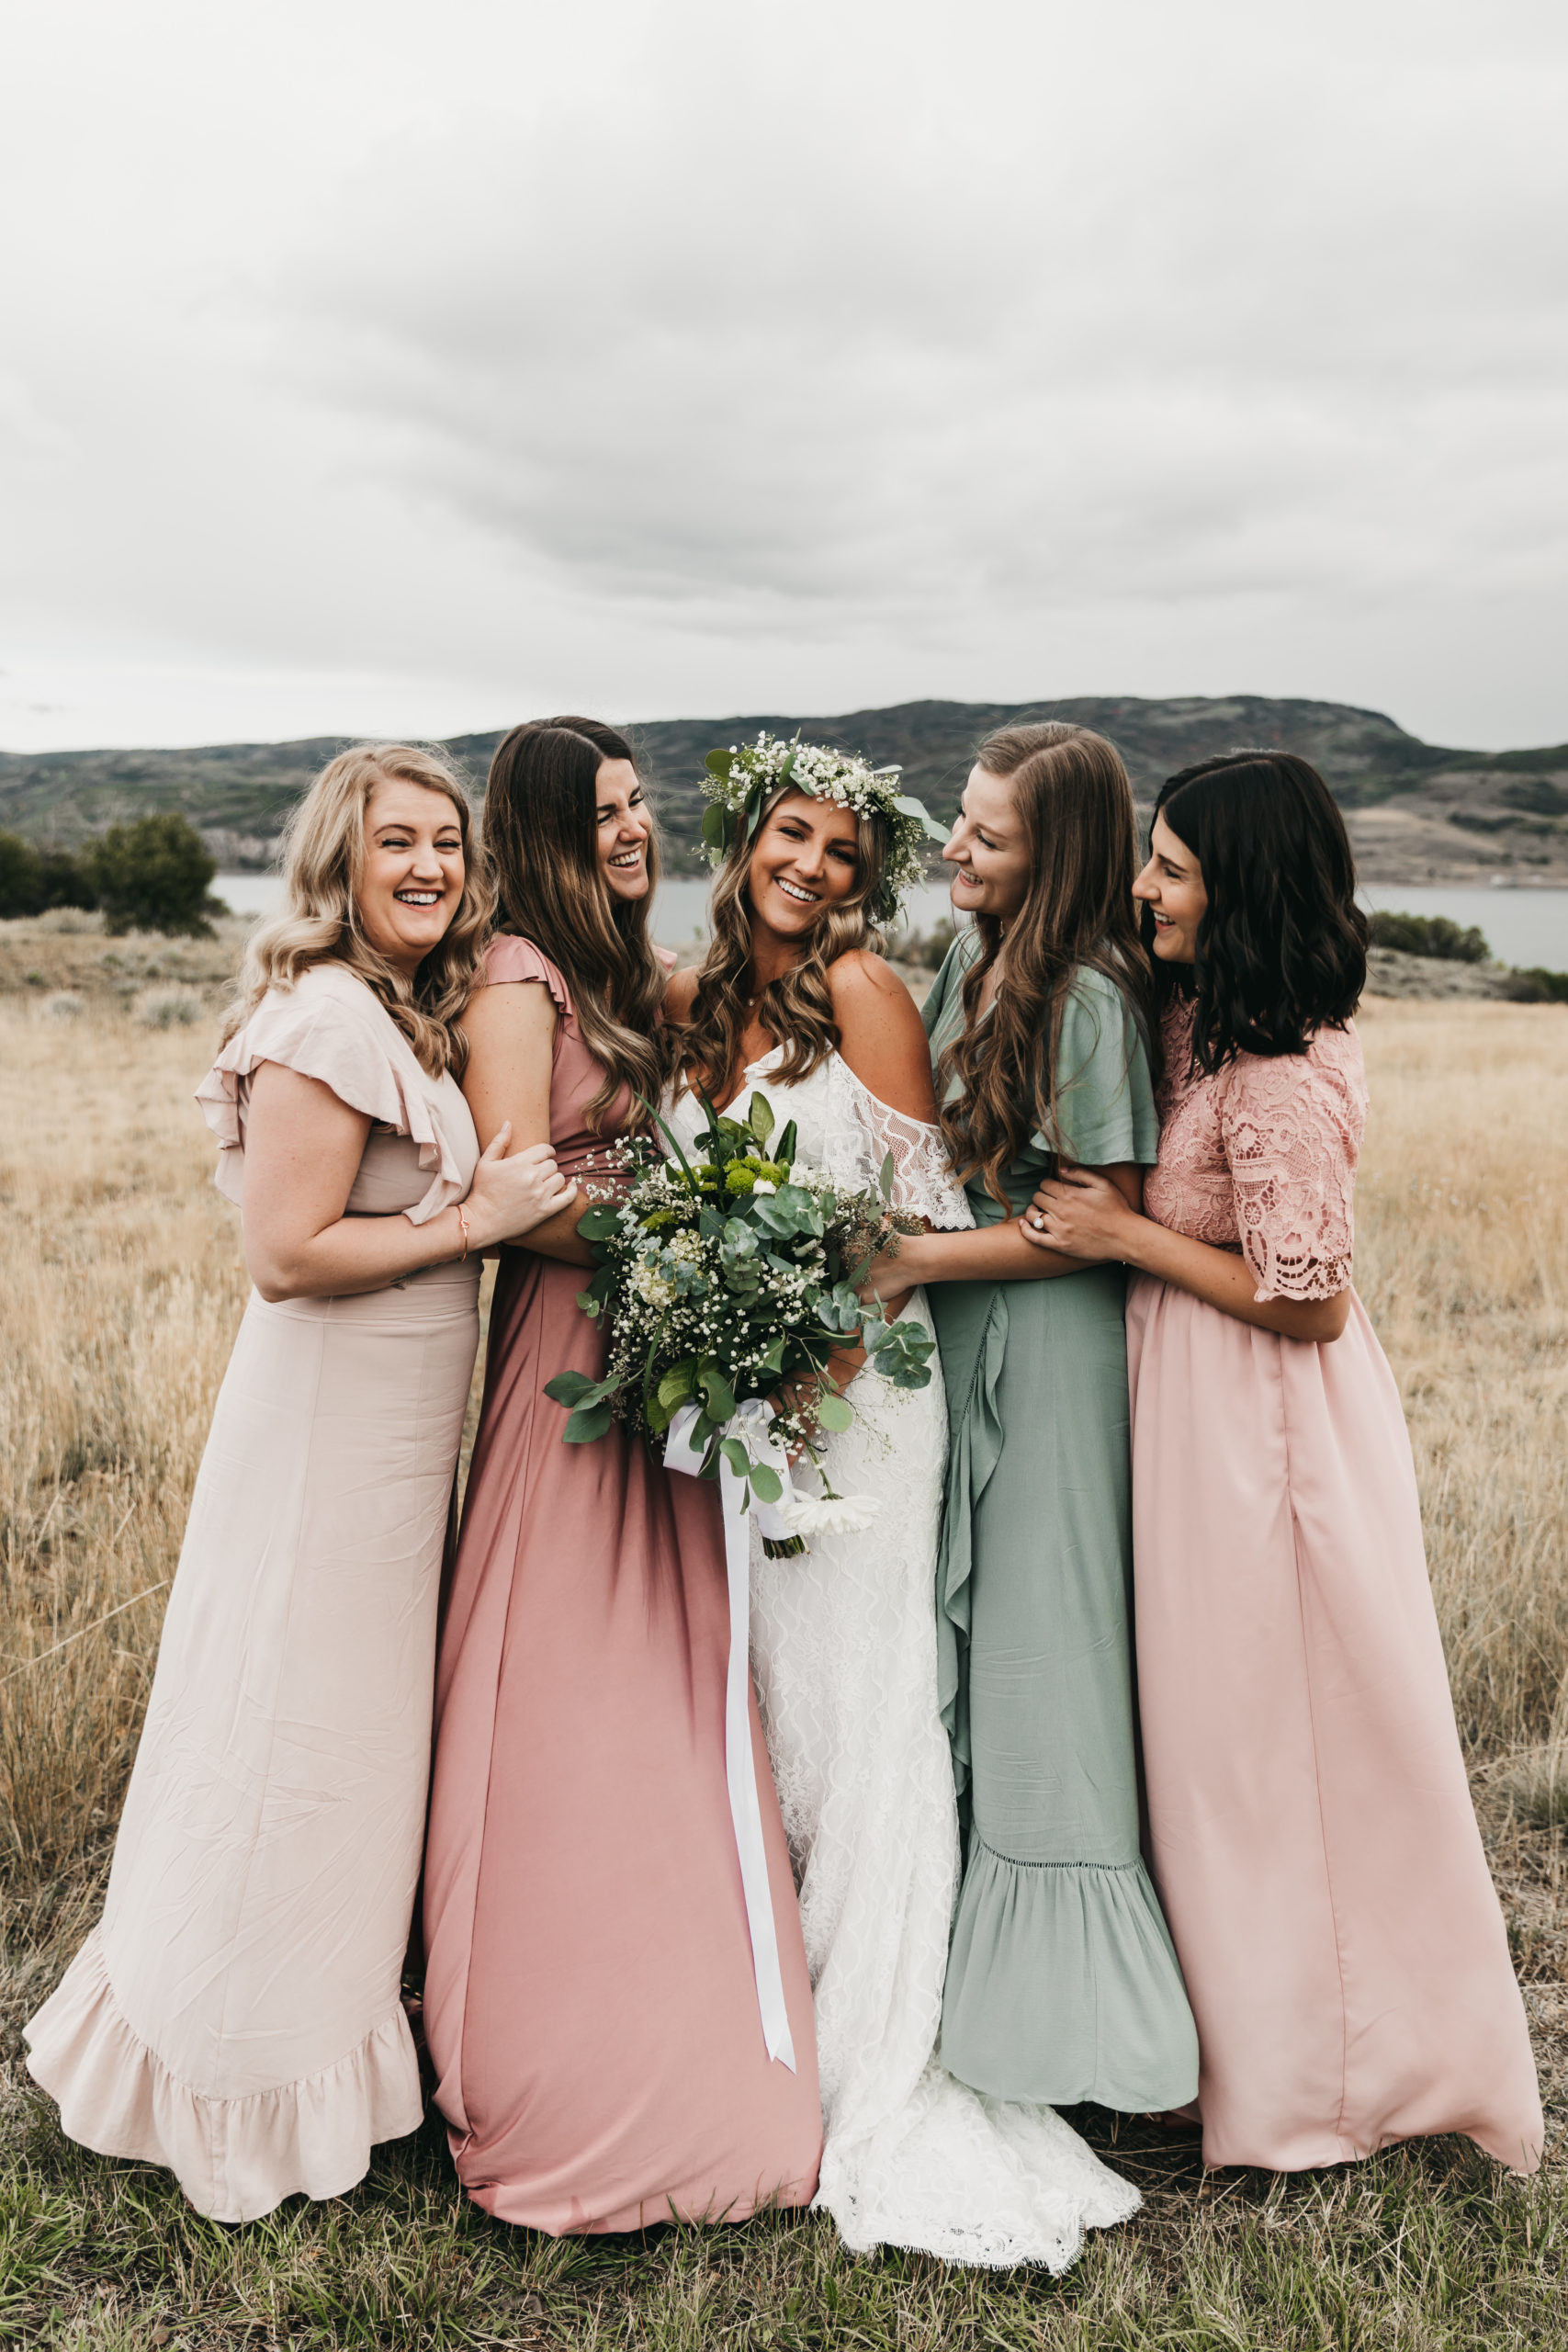 Bridesmaids in sage green and blush mismatch dresses